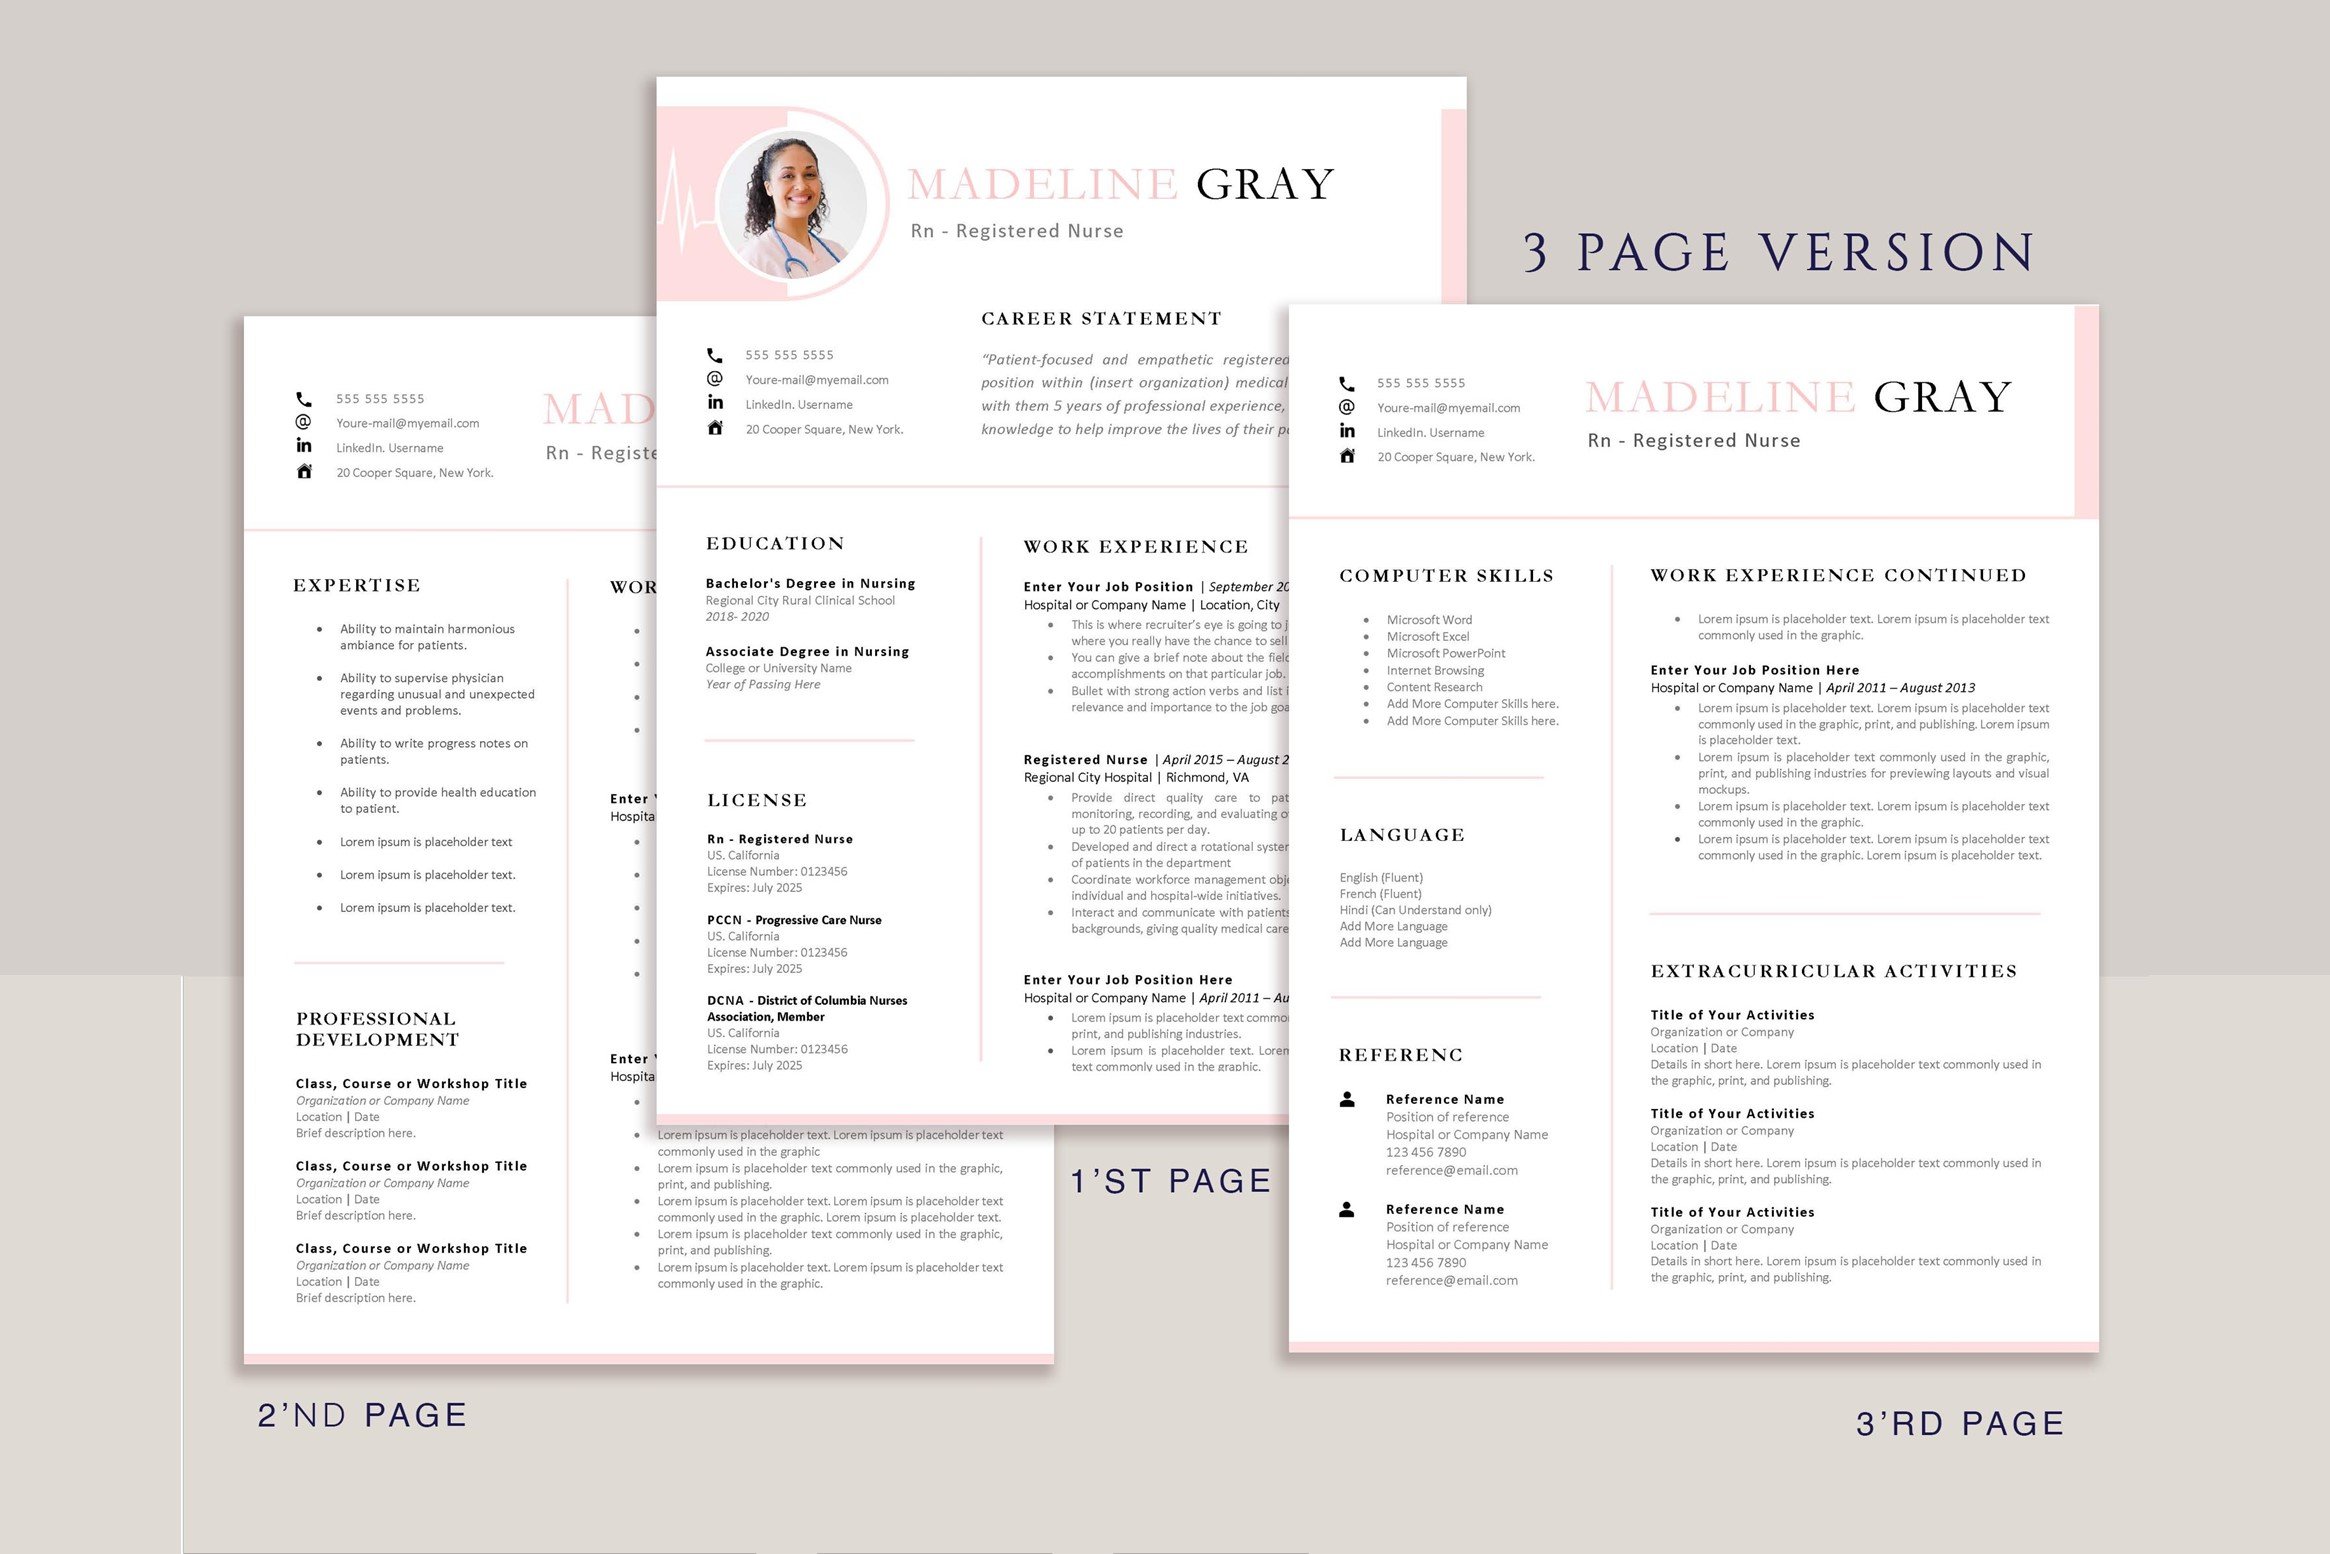 Set of three resume templates with a pink background.